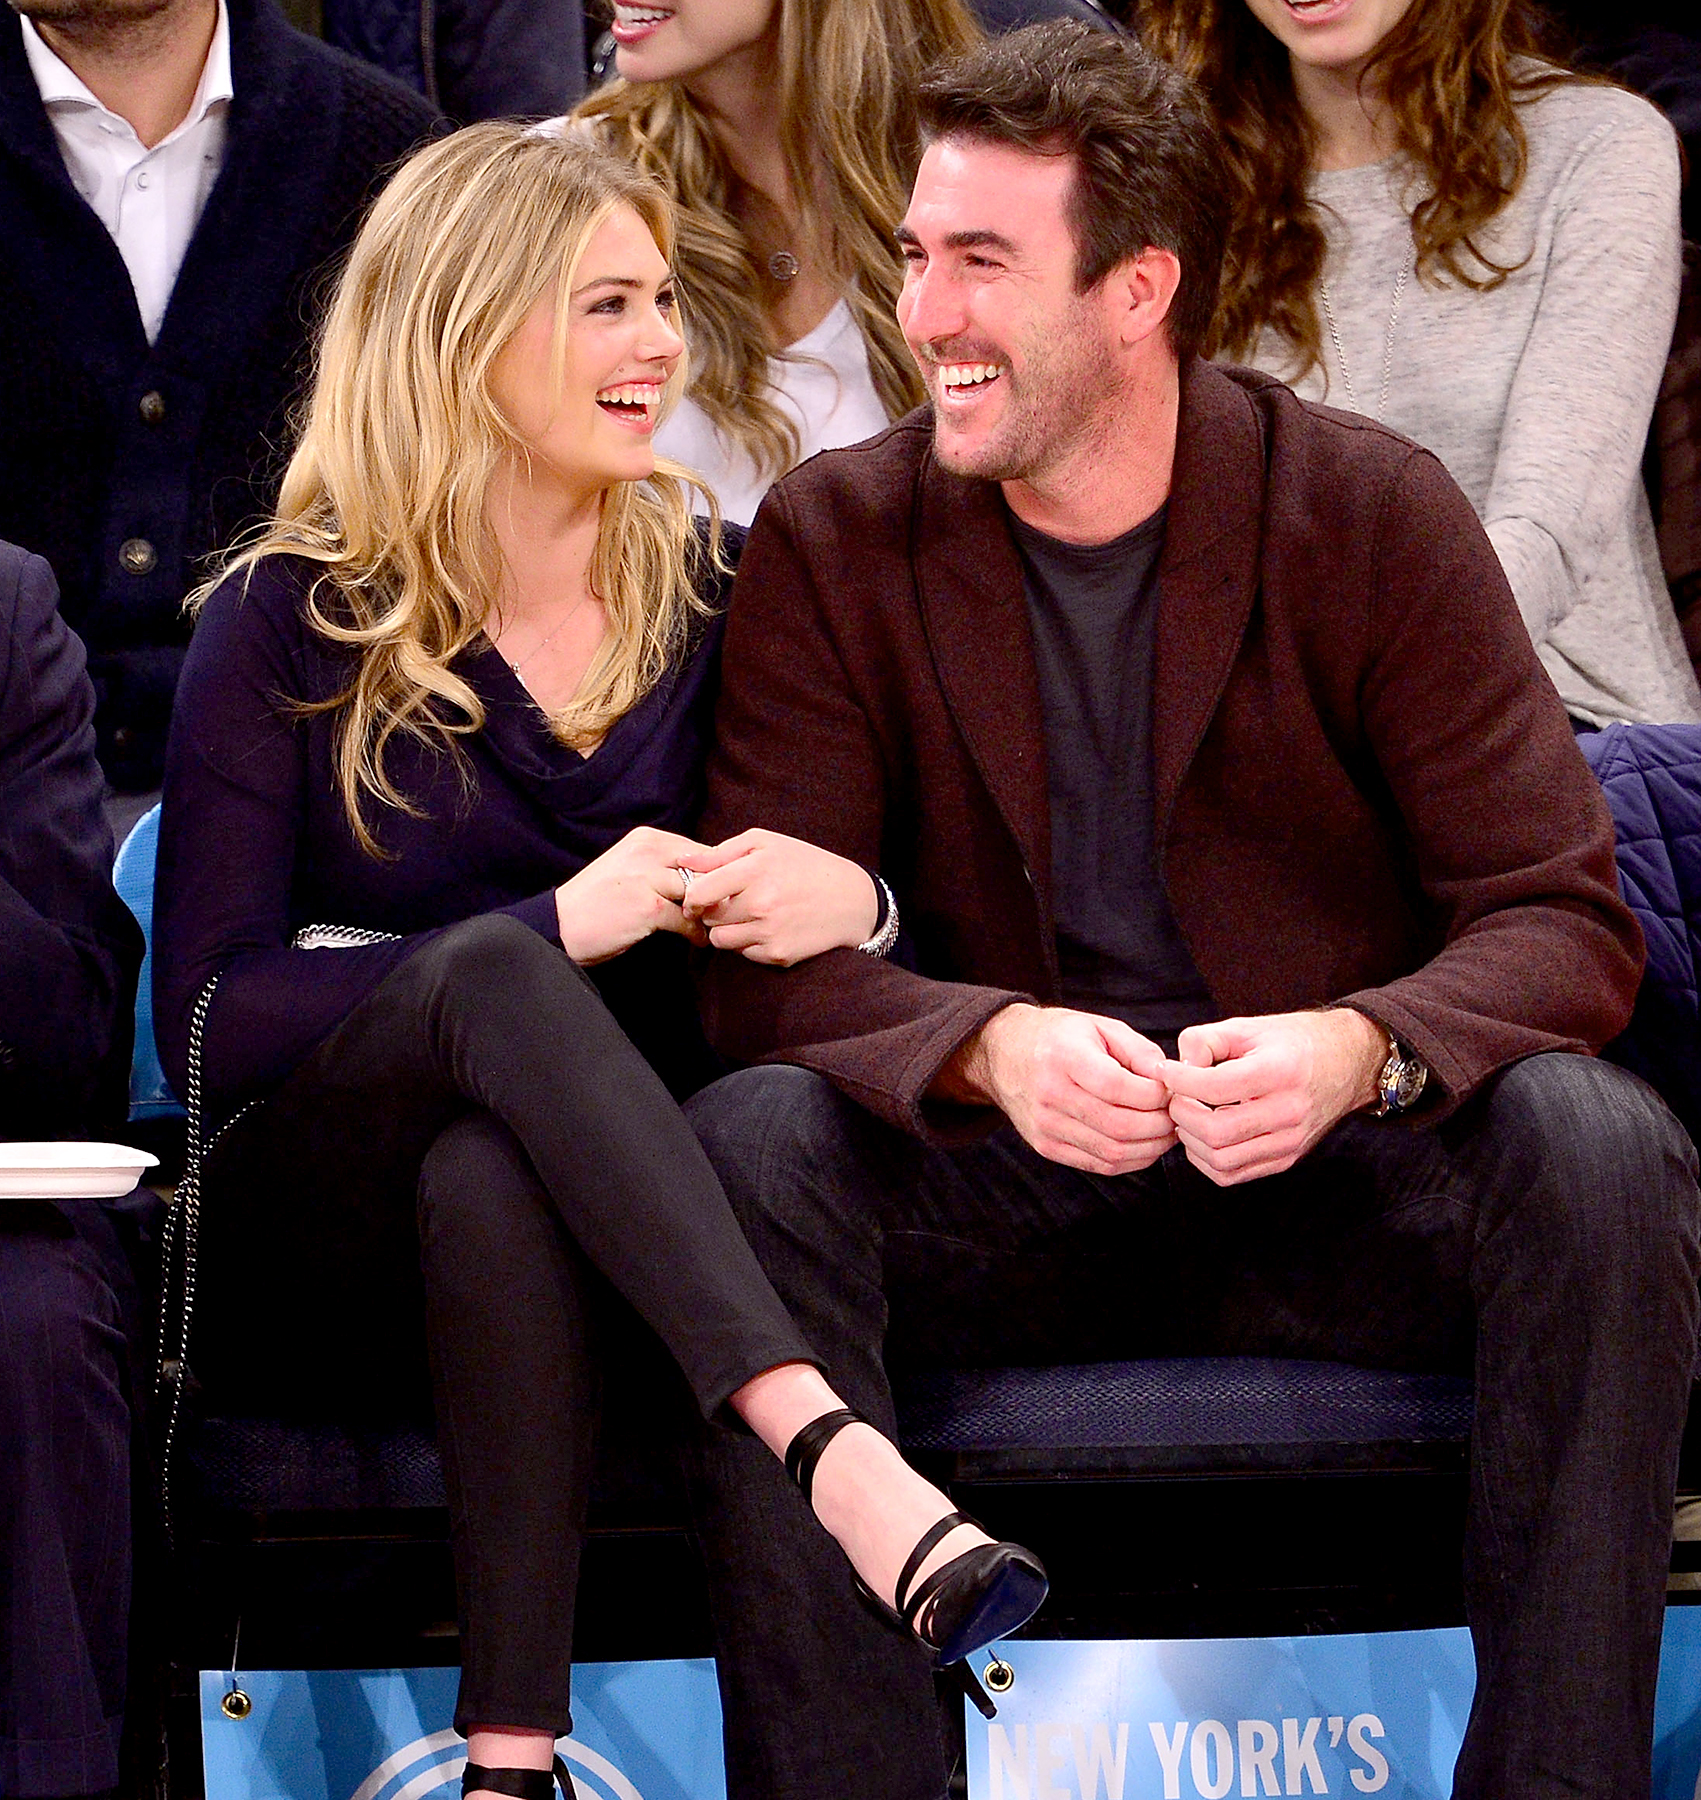 CONFIRMED: Kate Upton and Tigers Pitcher Justin Verlander Are Dating